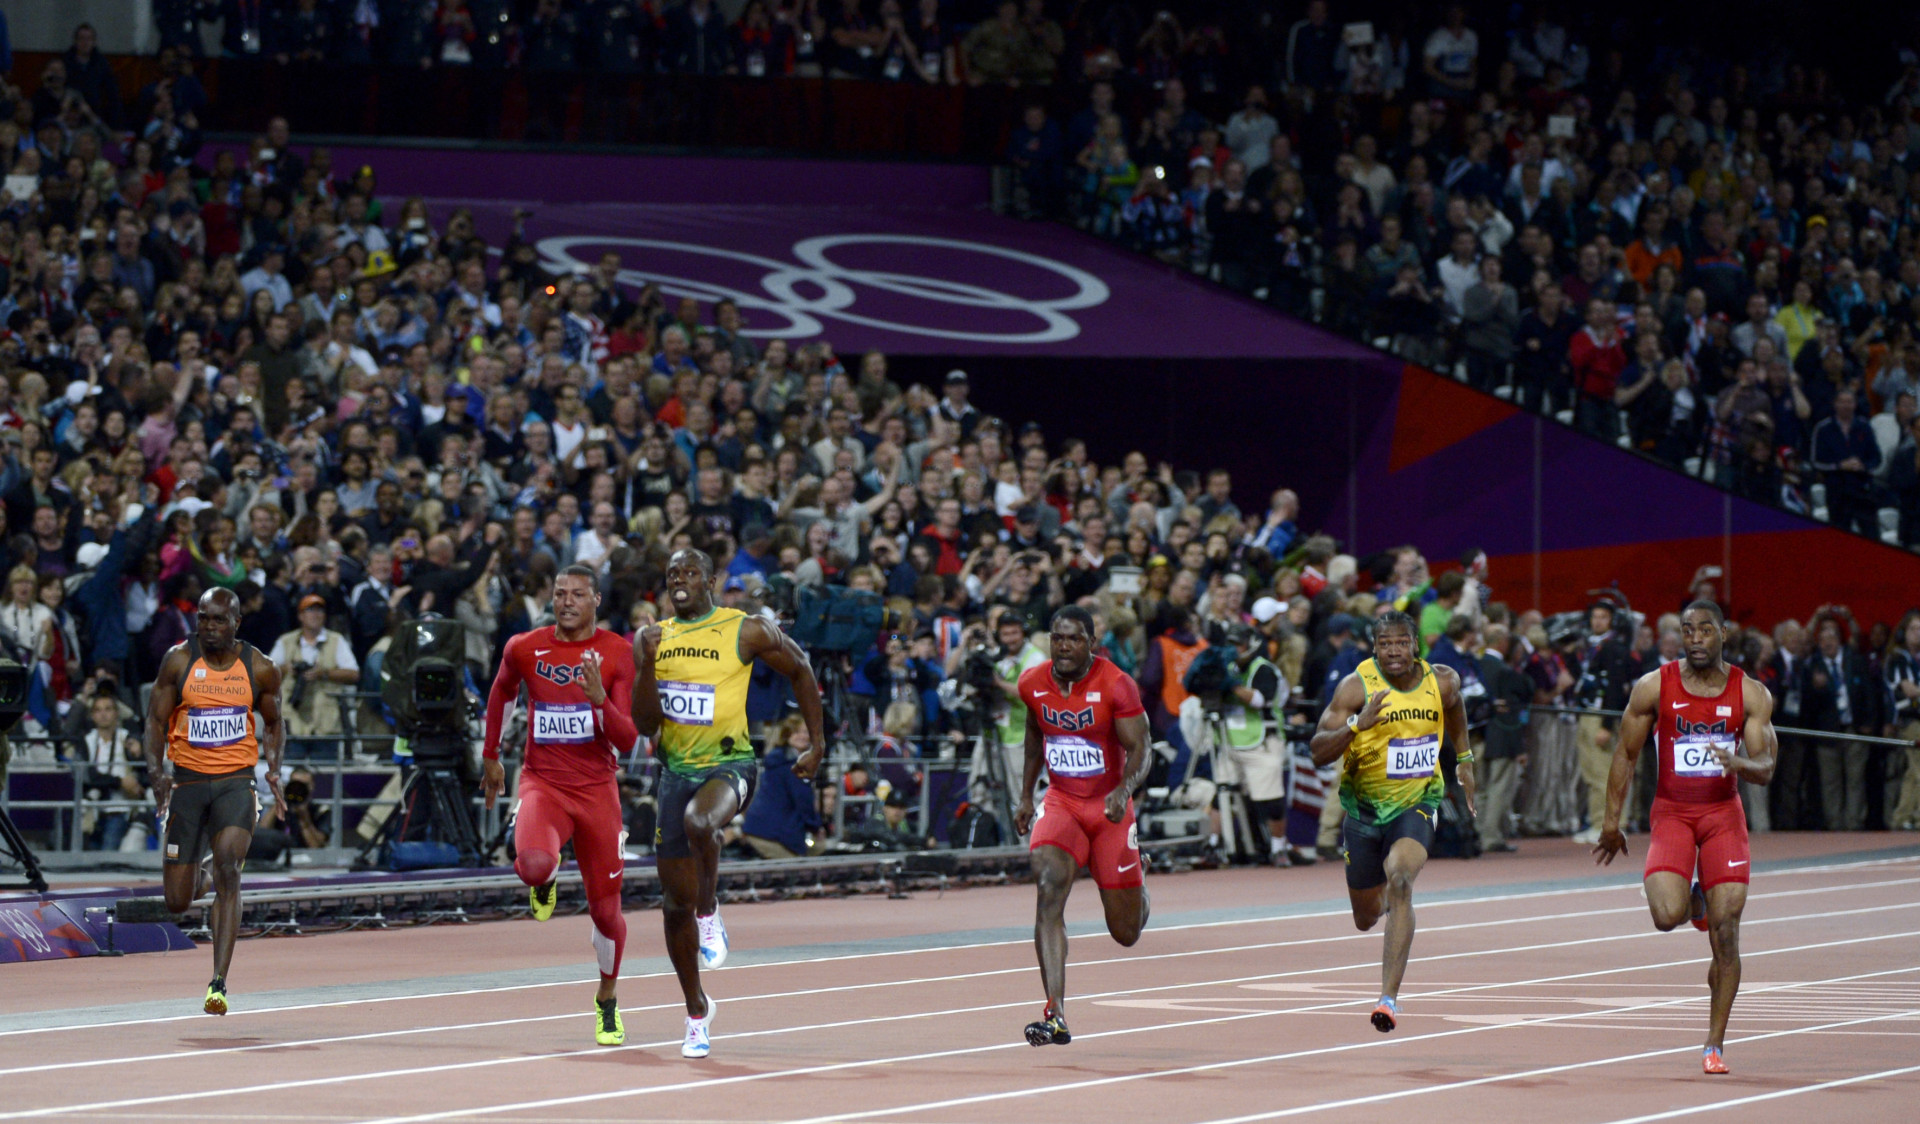 Usain Bolt of Jamaica pulls away to victory and a repeat gold medal in the Men's 100 Meter final at the 2012 London Olympics. : Olympics : Photography by Adam Stoltman: Sports Photography, The Arts, Portraiture, Travel, Photojournalism and Fine Art in New York